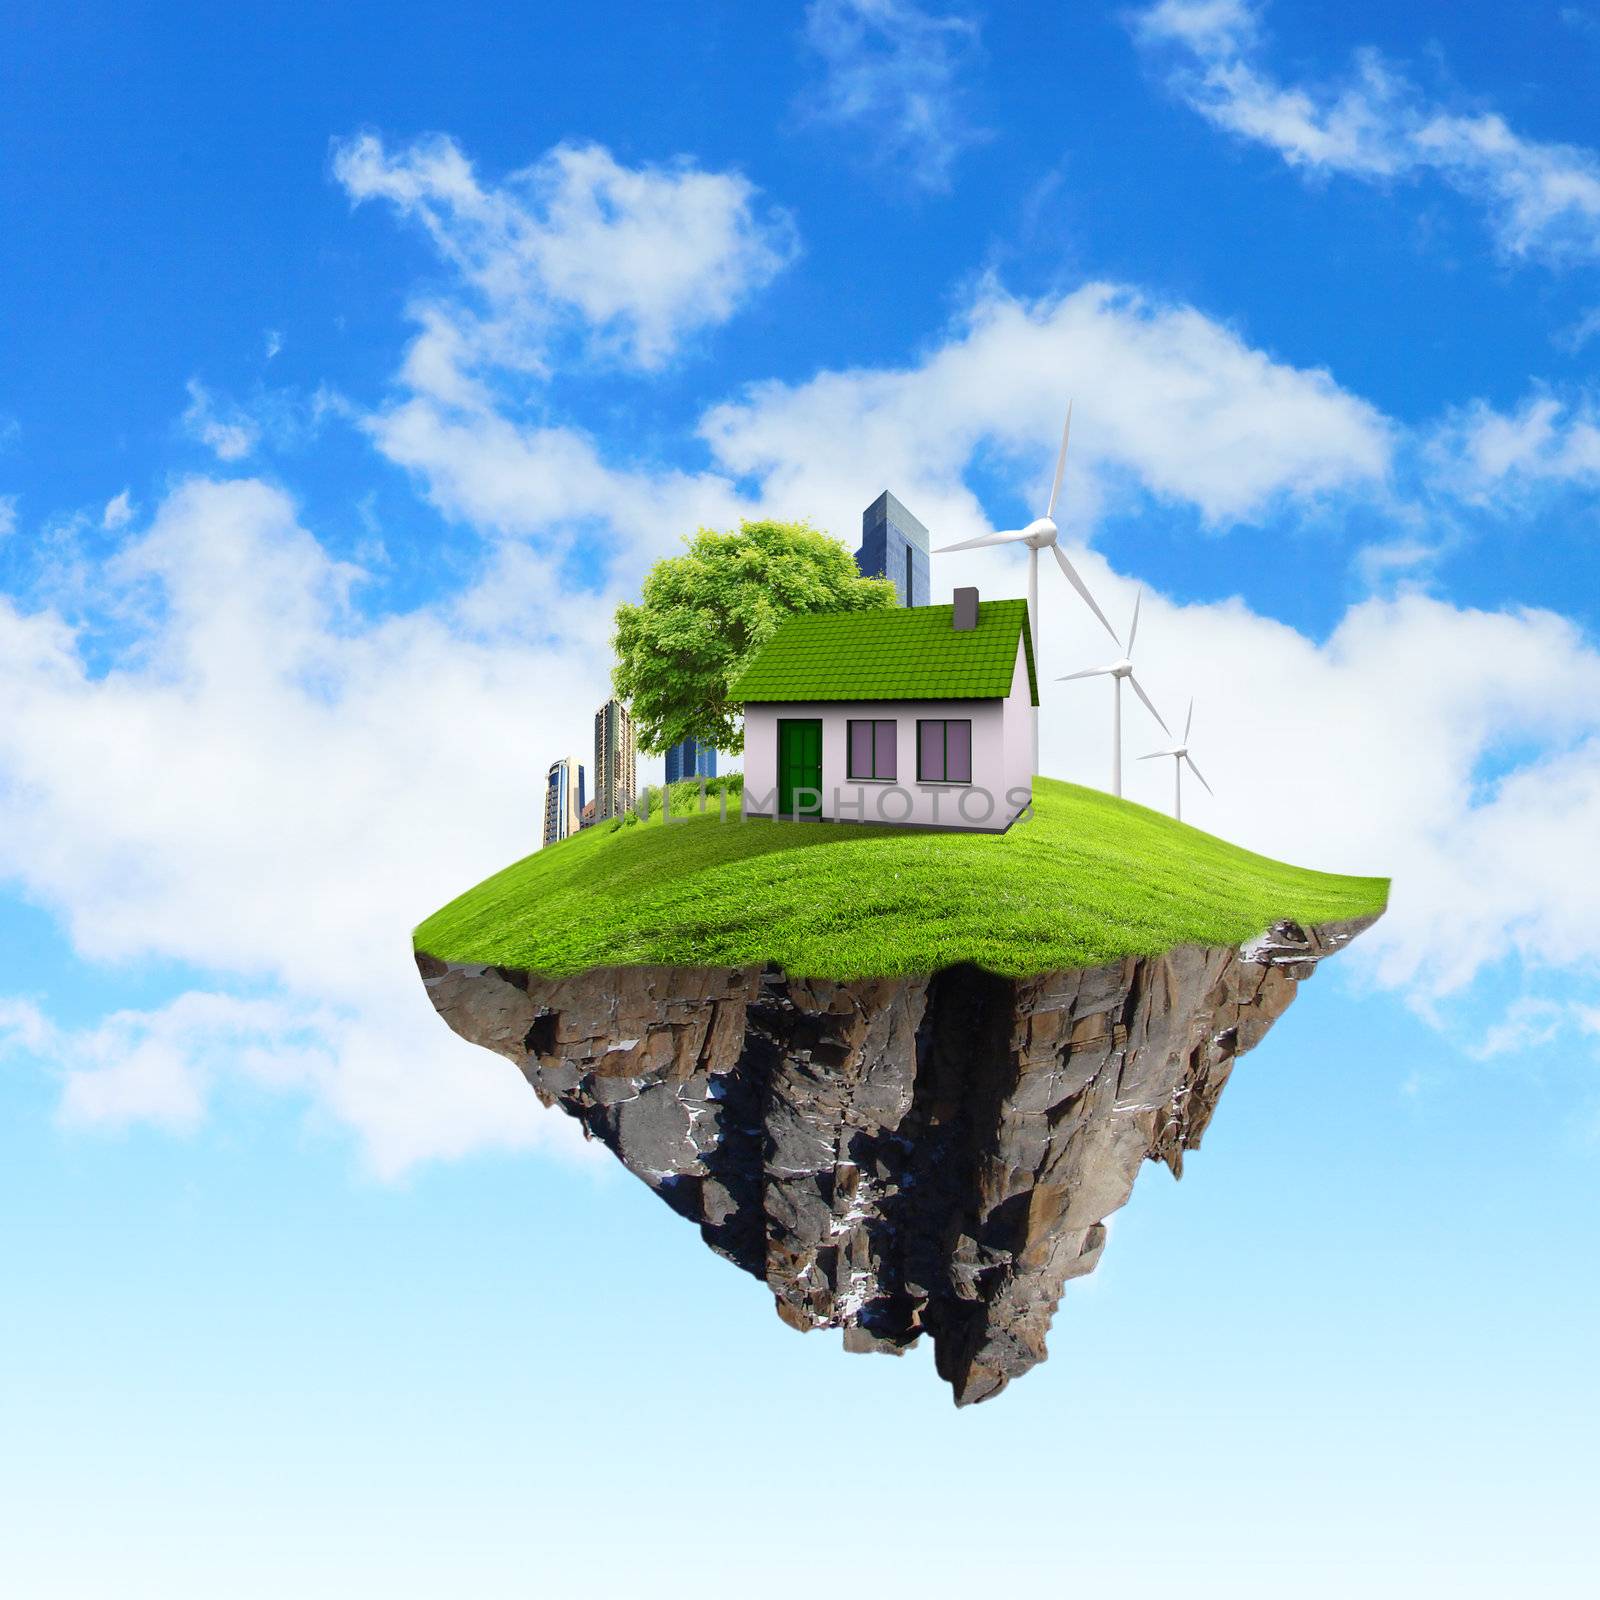 Little fine island / planet. A piece of land in the air. Lawn with house and tree. Pathway in the grass. Detailed ground in the base. Concept of success and happiness, idyllic ecological lifestyle